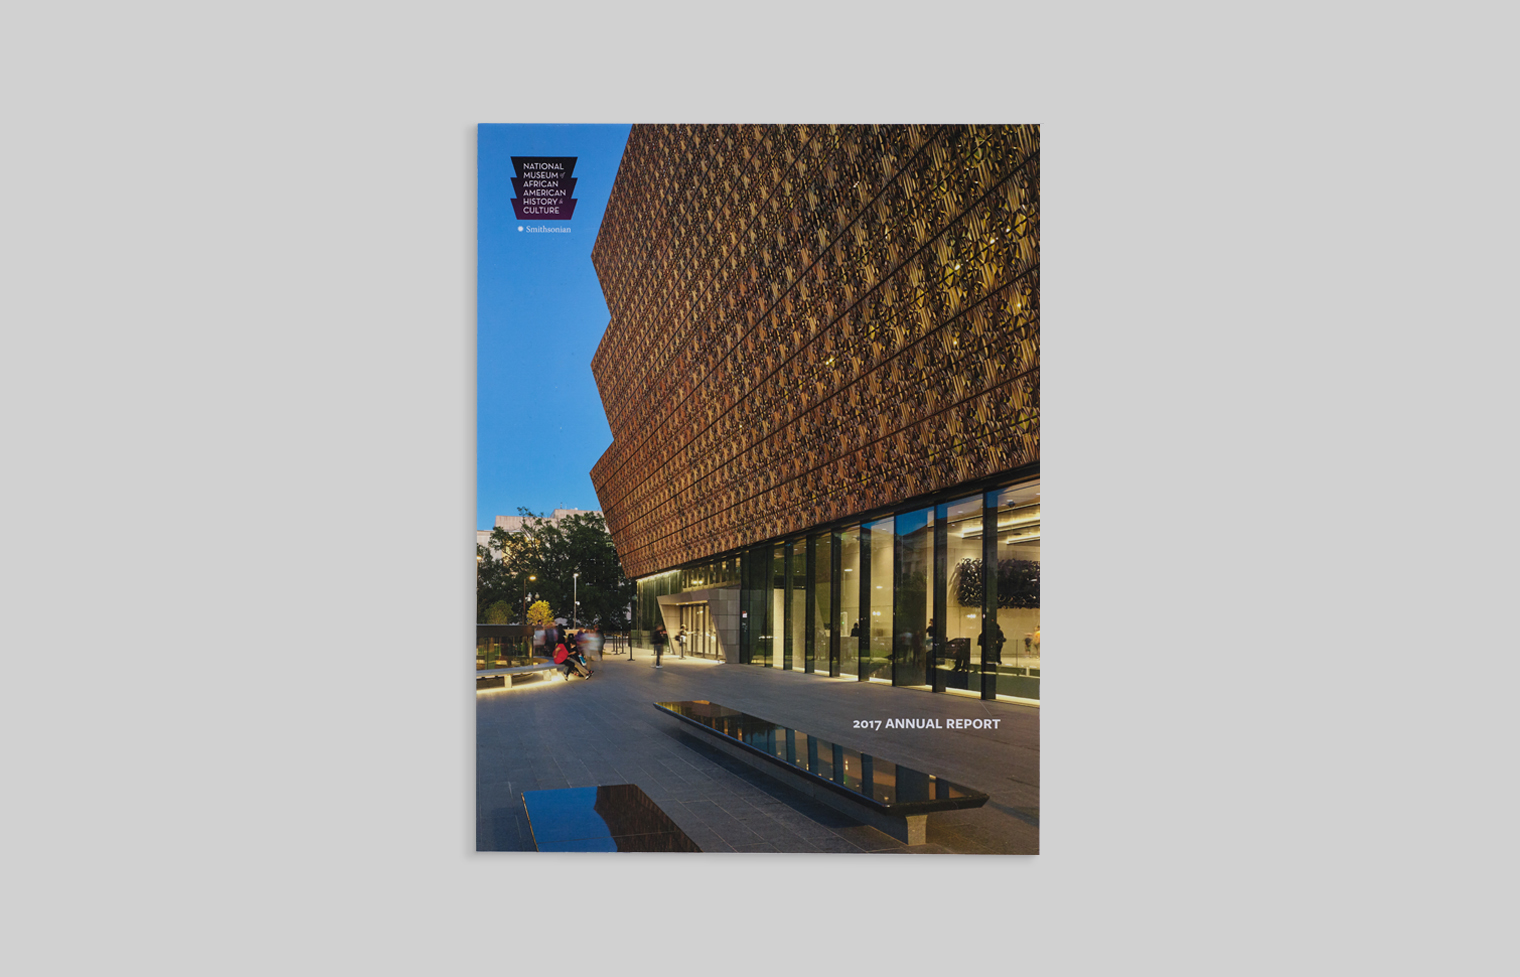 The distinctive building is featured on the cover is meant to evoke the three-tiered crowns used in Yoruban art from West Africa.